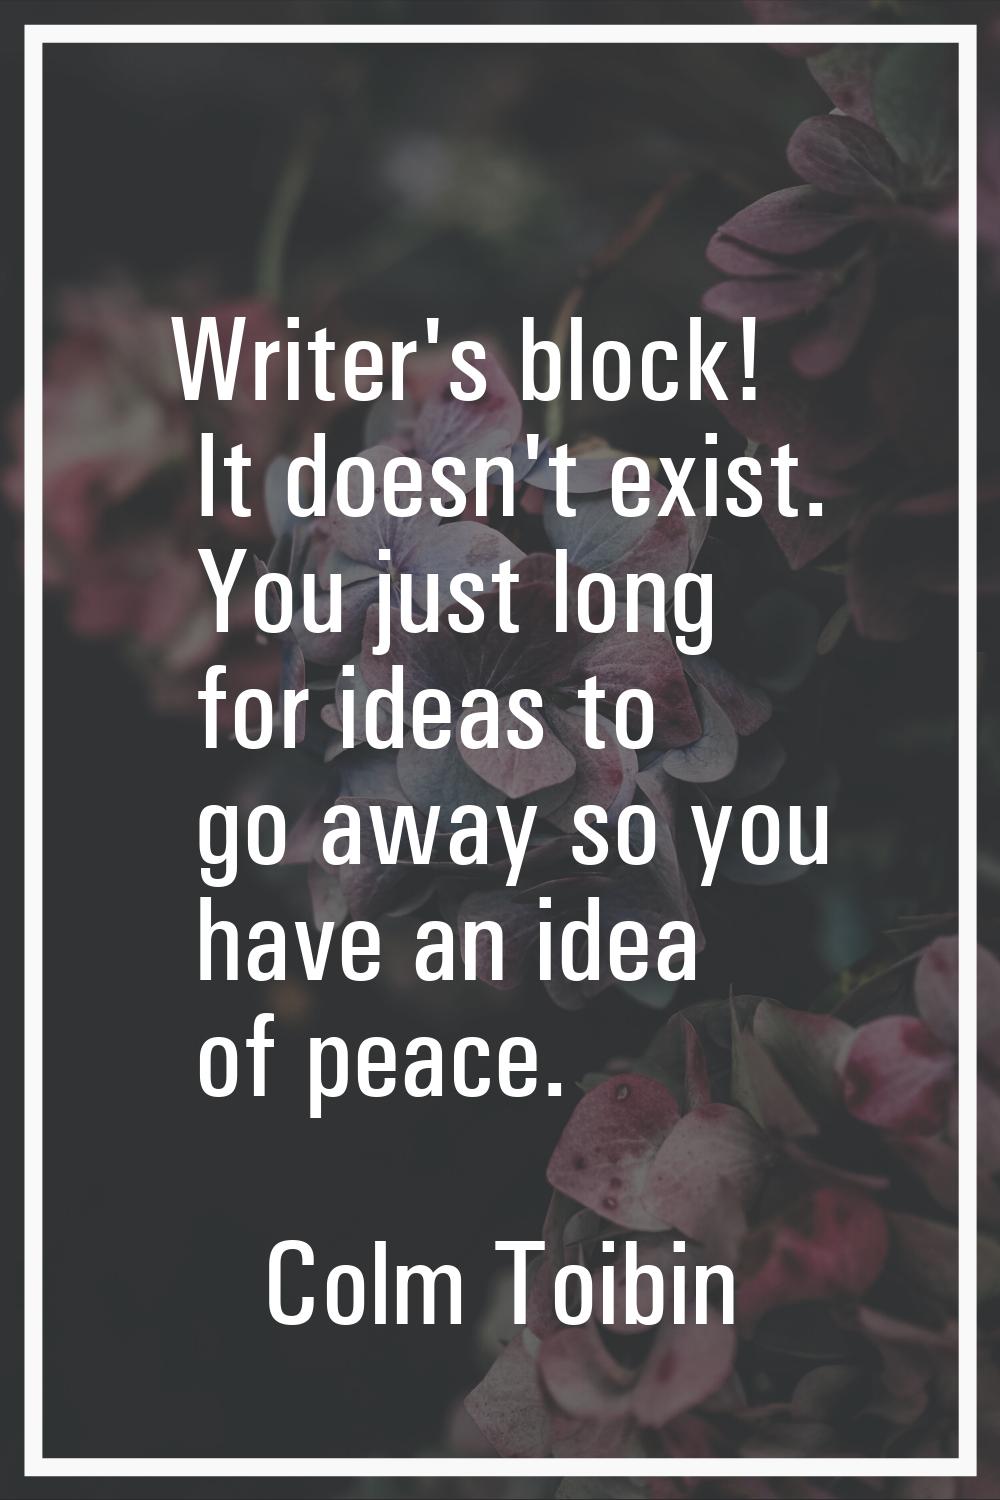 Writer's block! It doesn't exist. You just long for ideas to go away so you have an idea of peace.